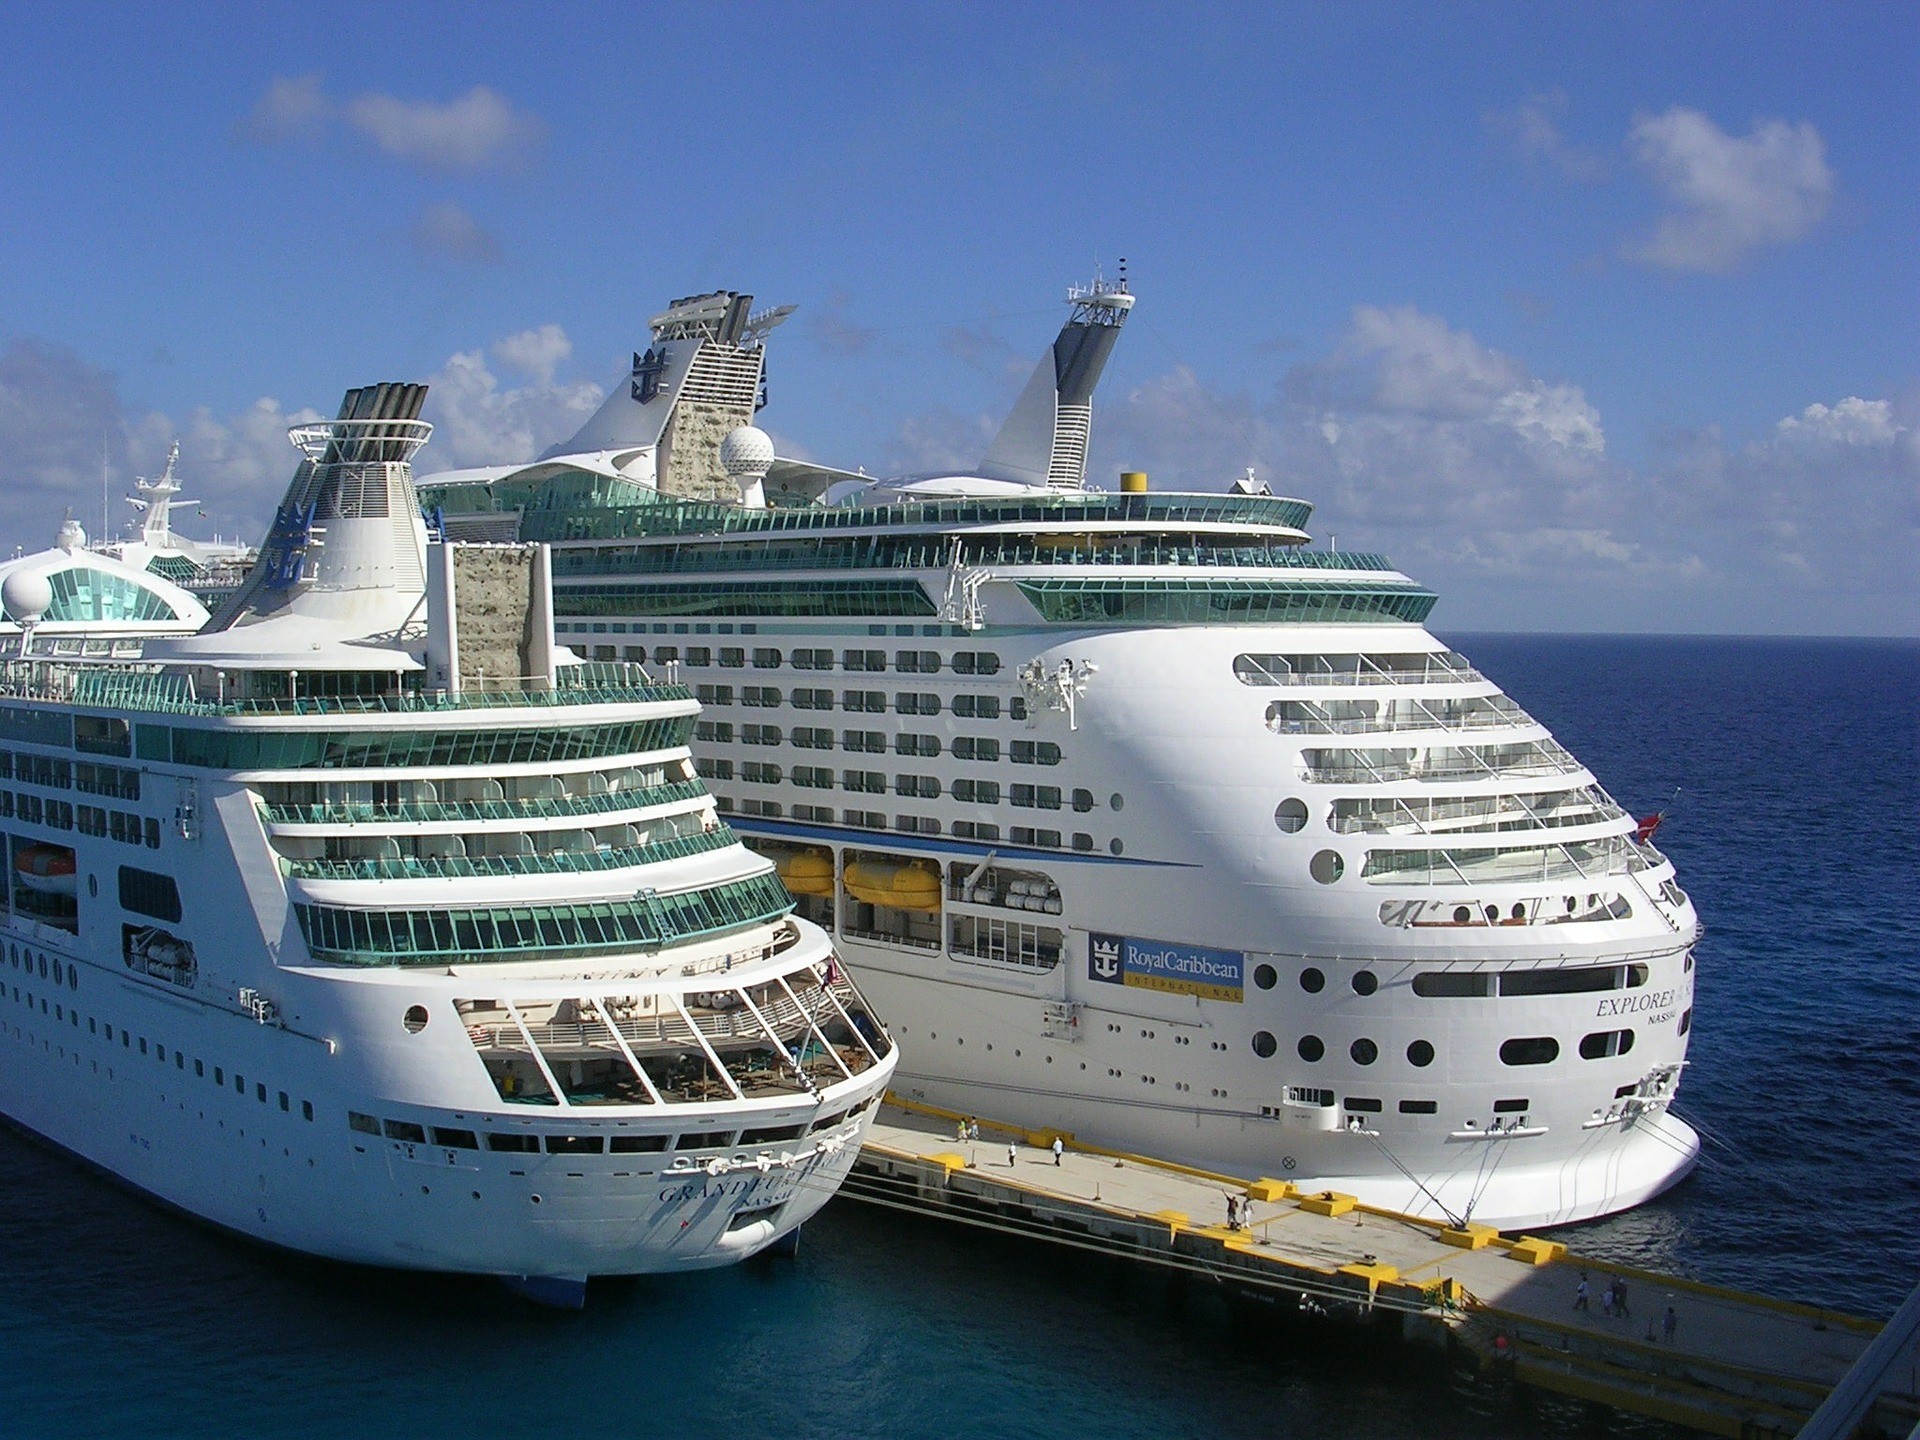 How to Sneak Alcohol on a Cruise: A Hypothetical (and Highly